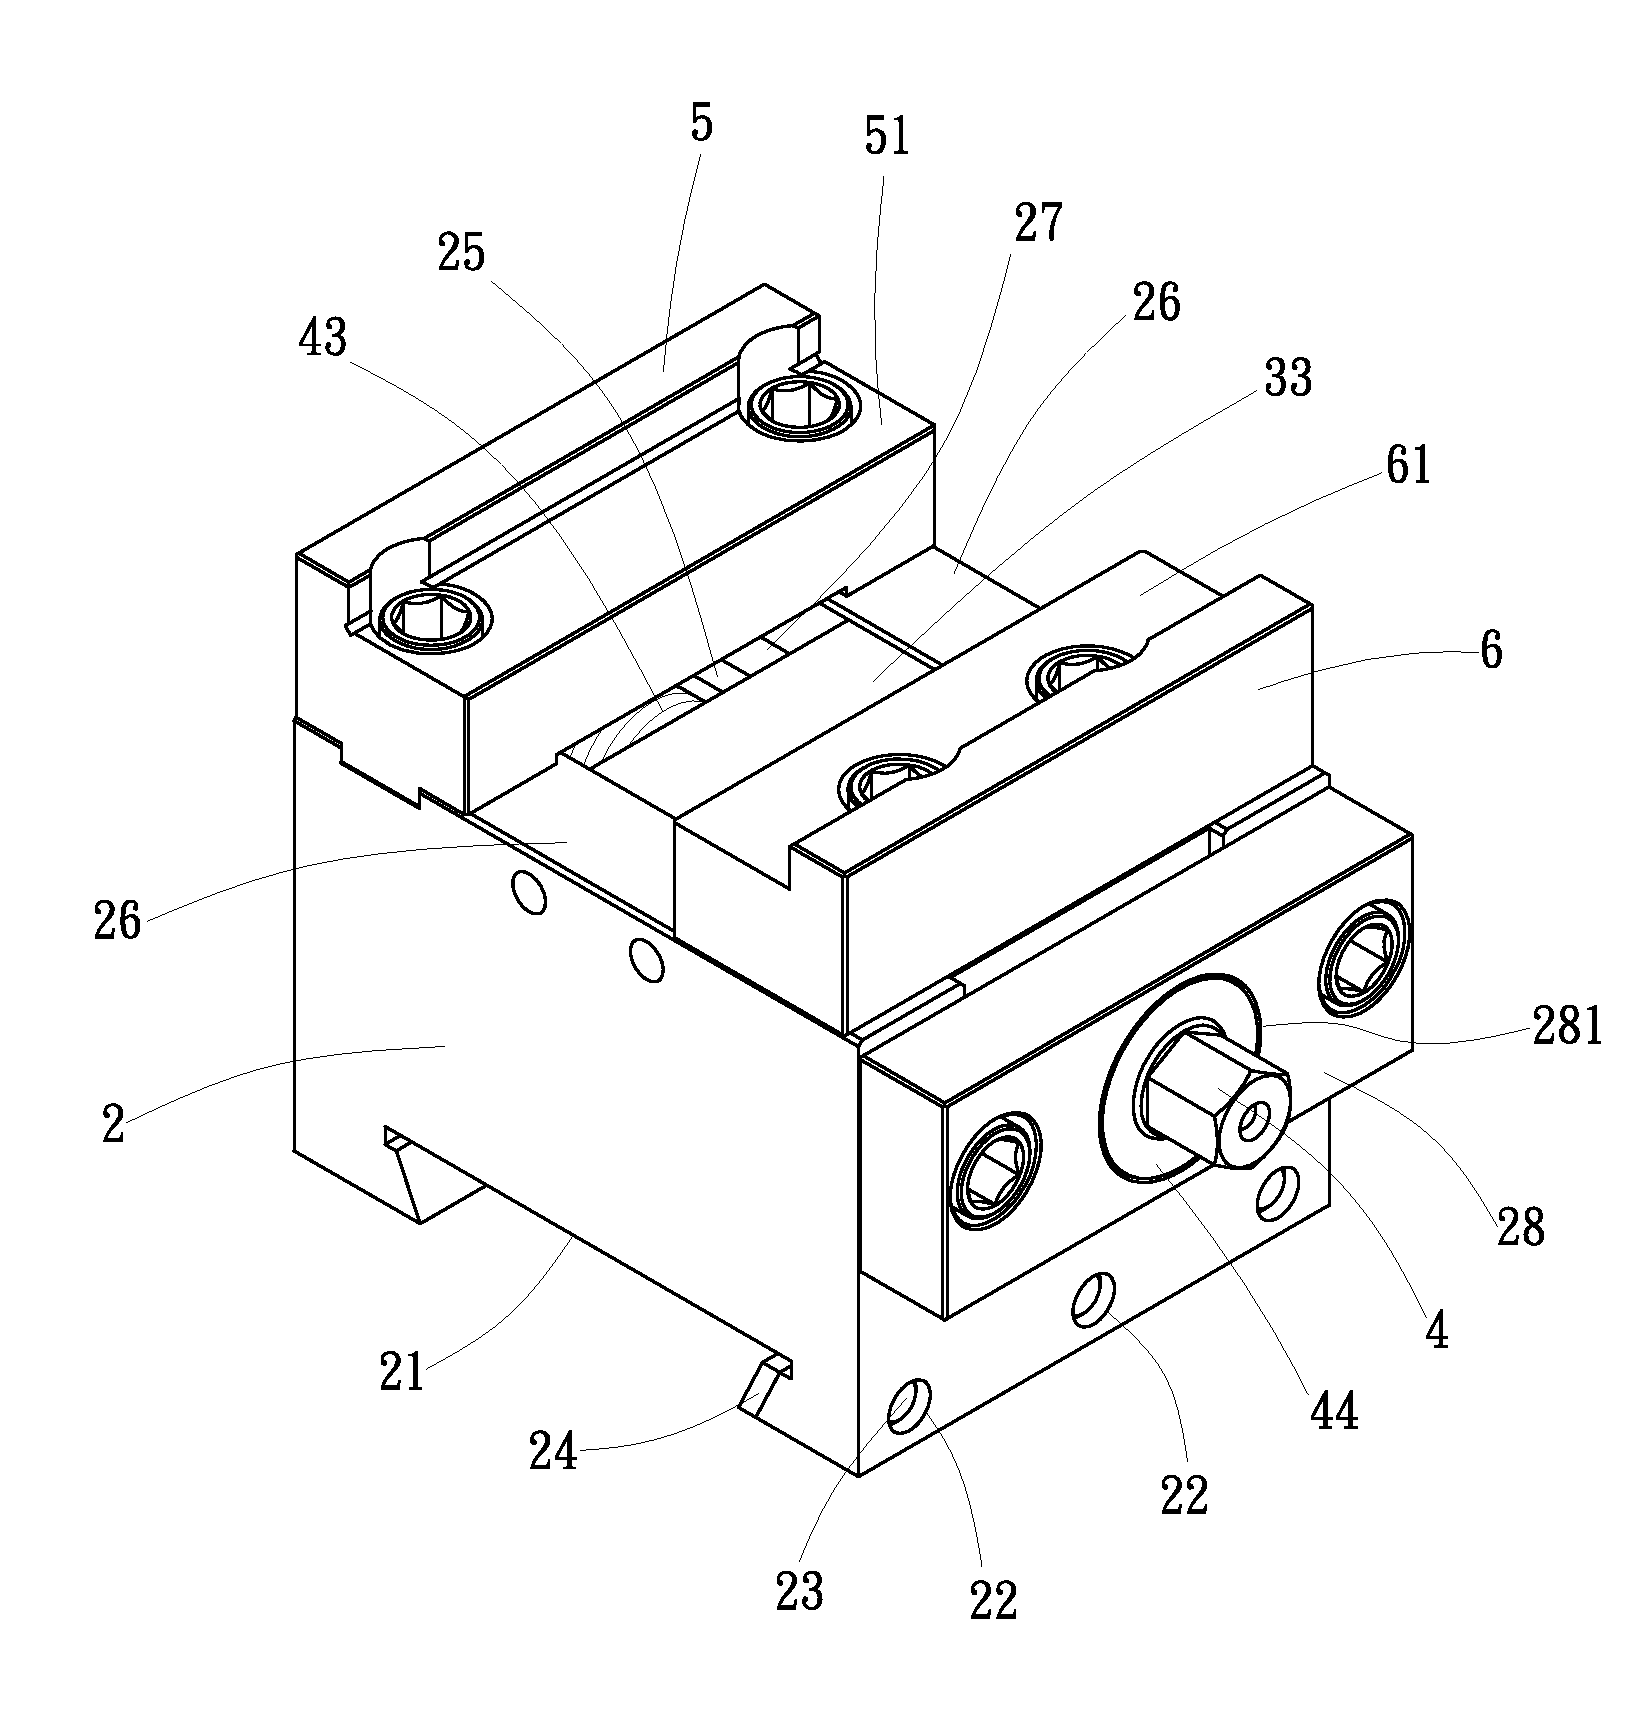 Micro-adjustable parallel bench vise